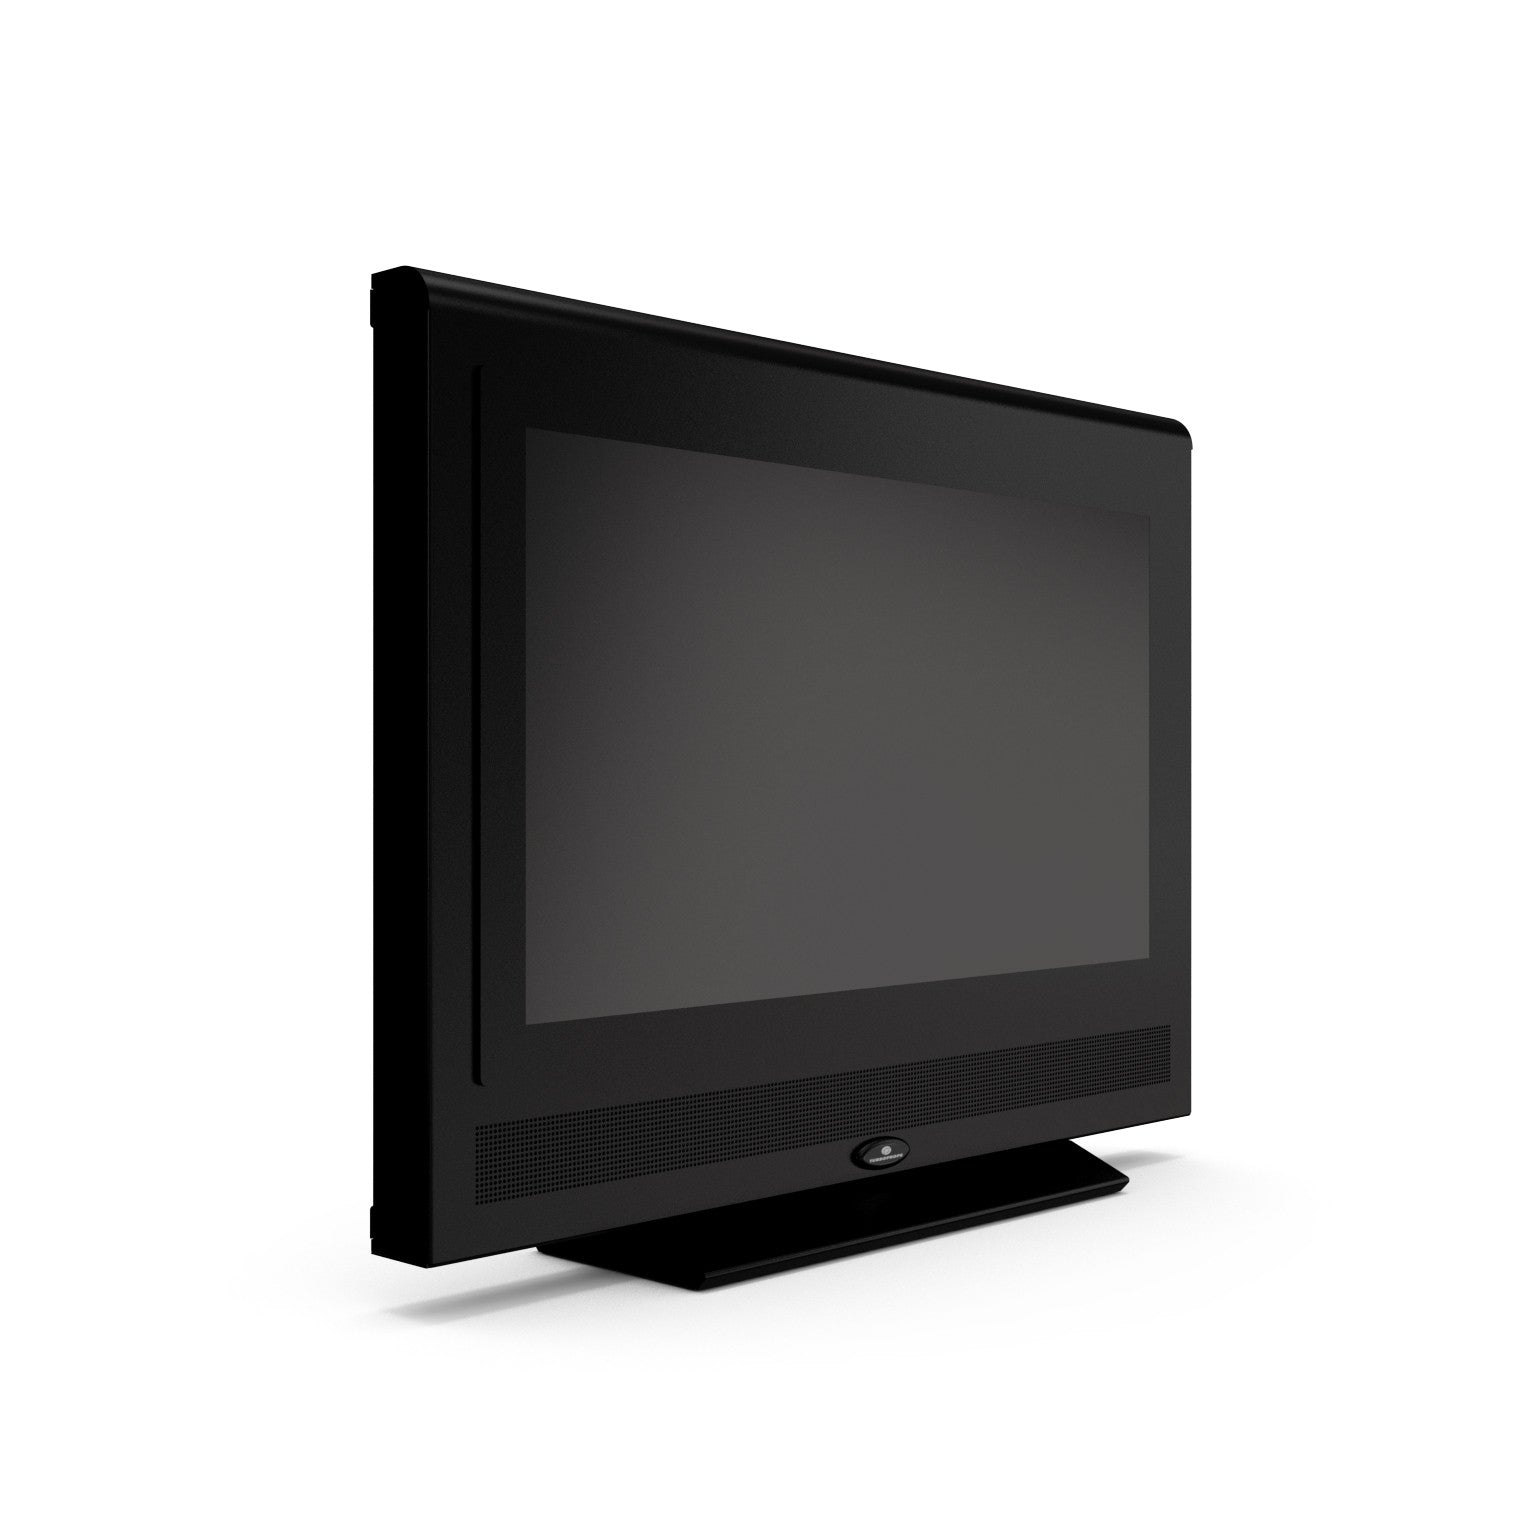 Turbo Elite 26 inch LCD TV prop rounded top in gloss black – Turboprops